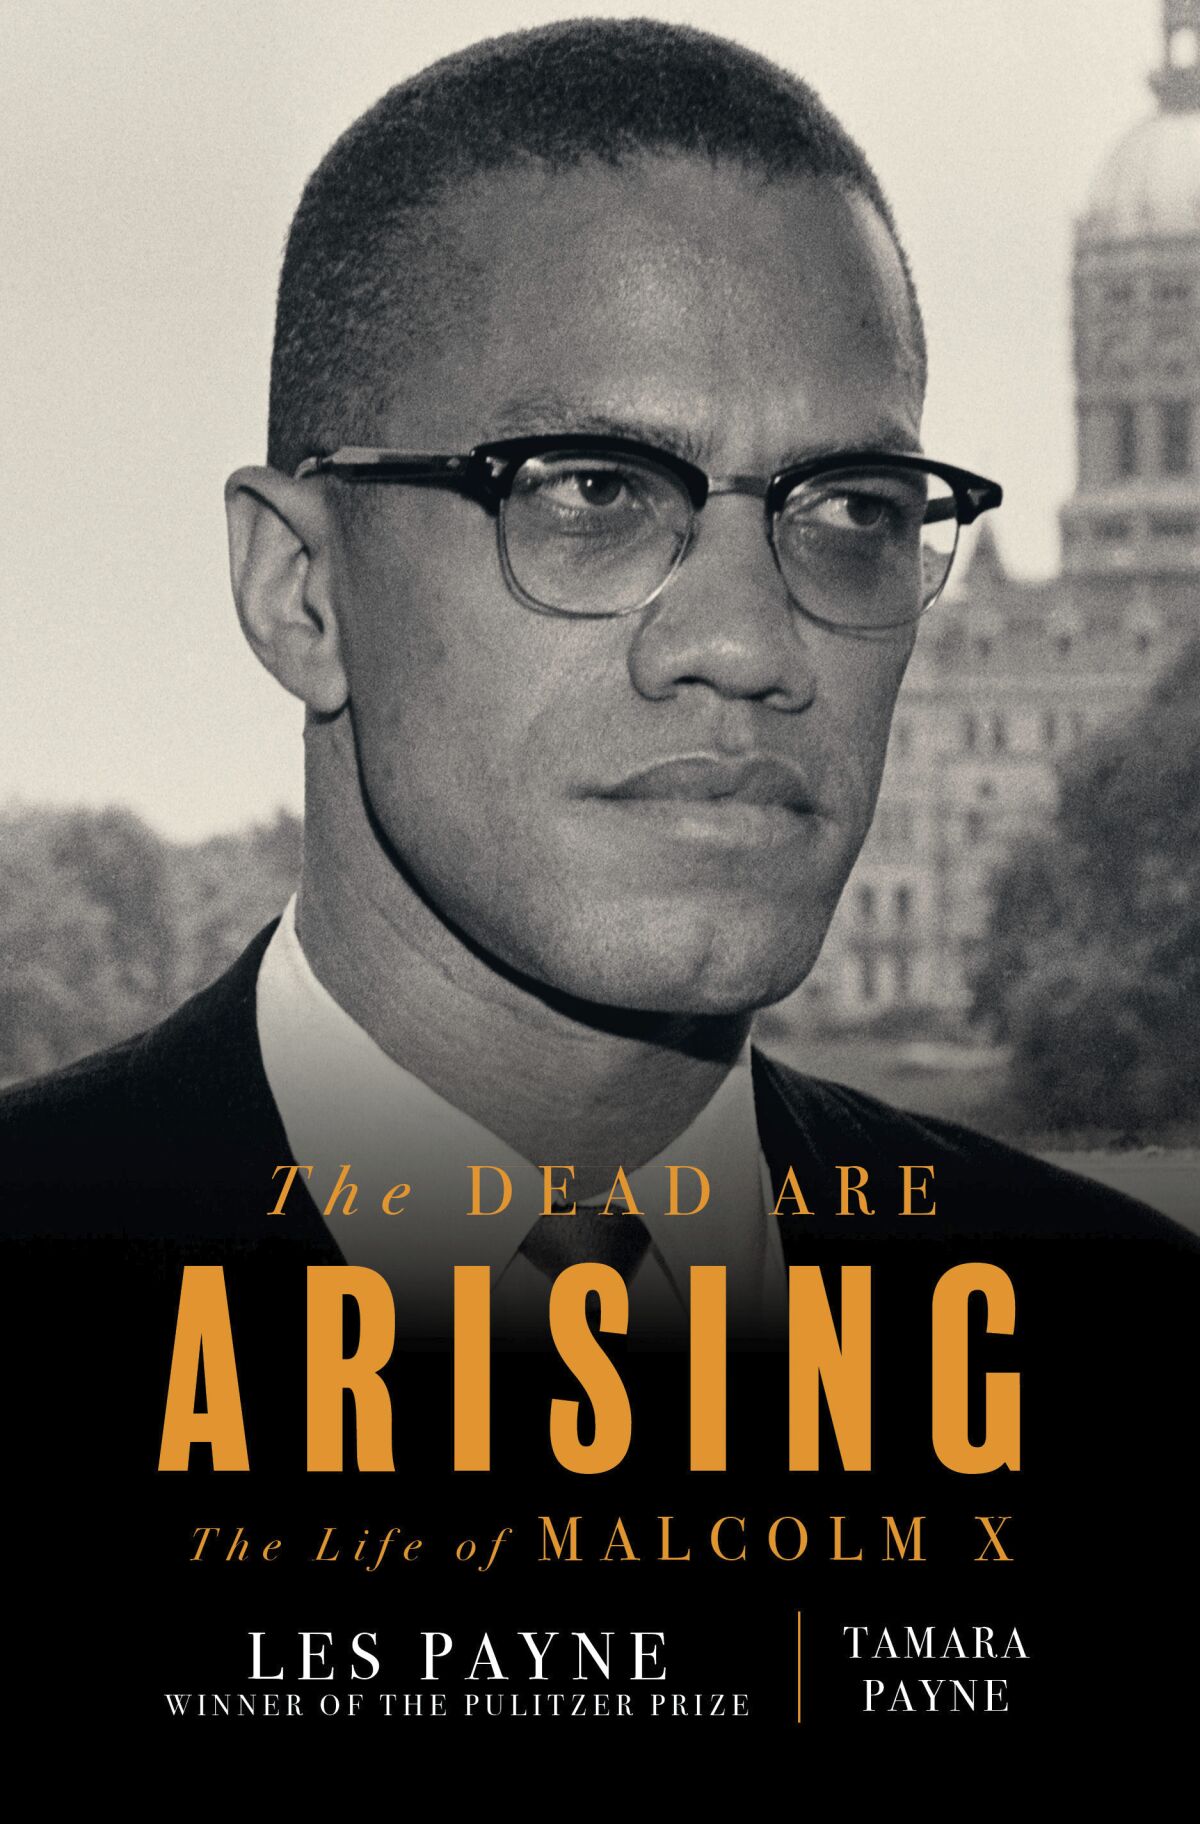 Malcolm X on the cover of Pulitzer-winning biography "The Dead Are Arising: The Life of Malcolm X."